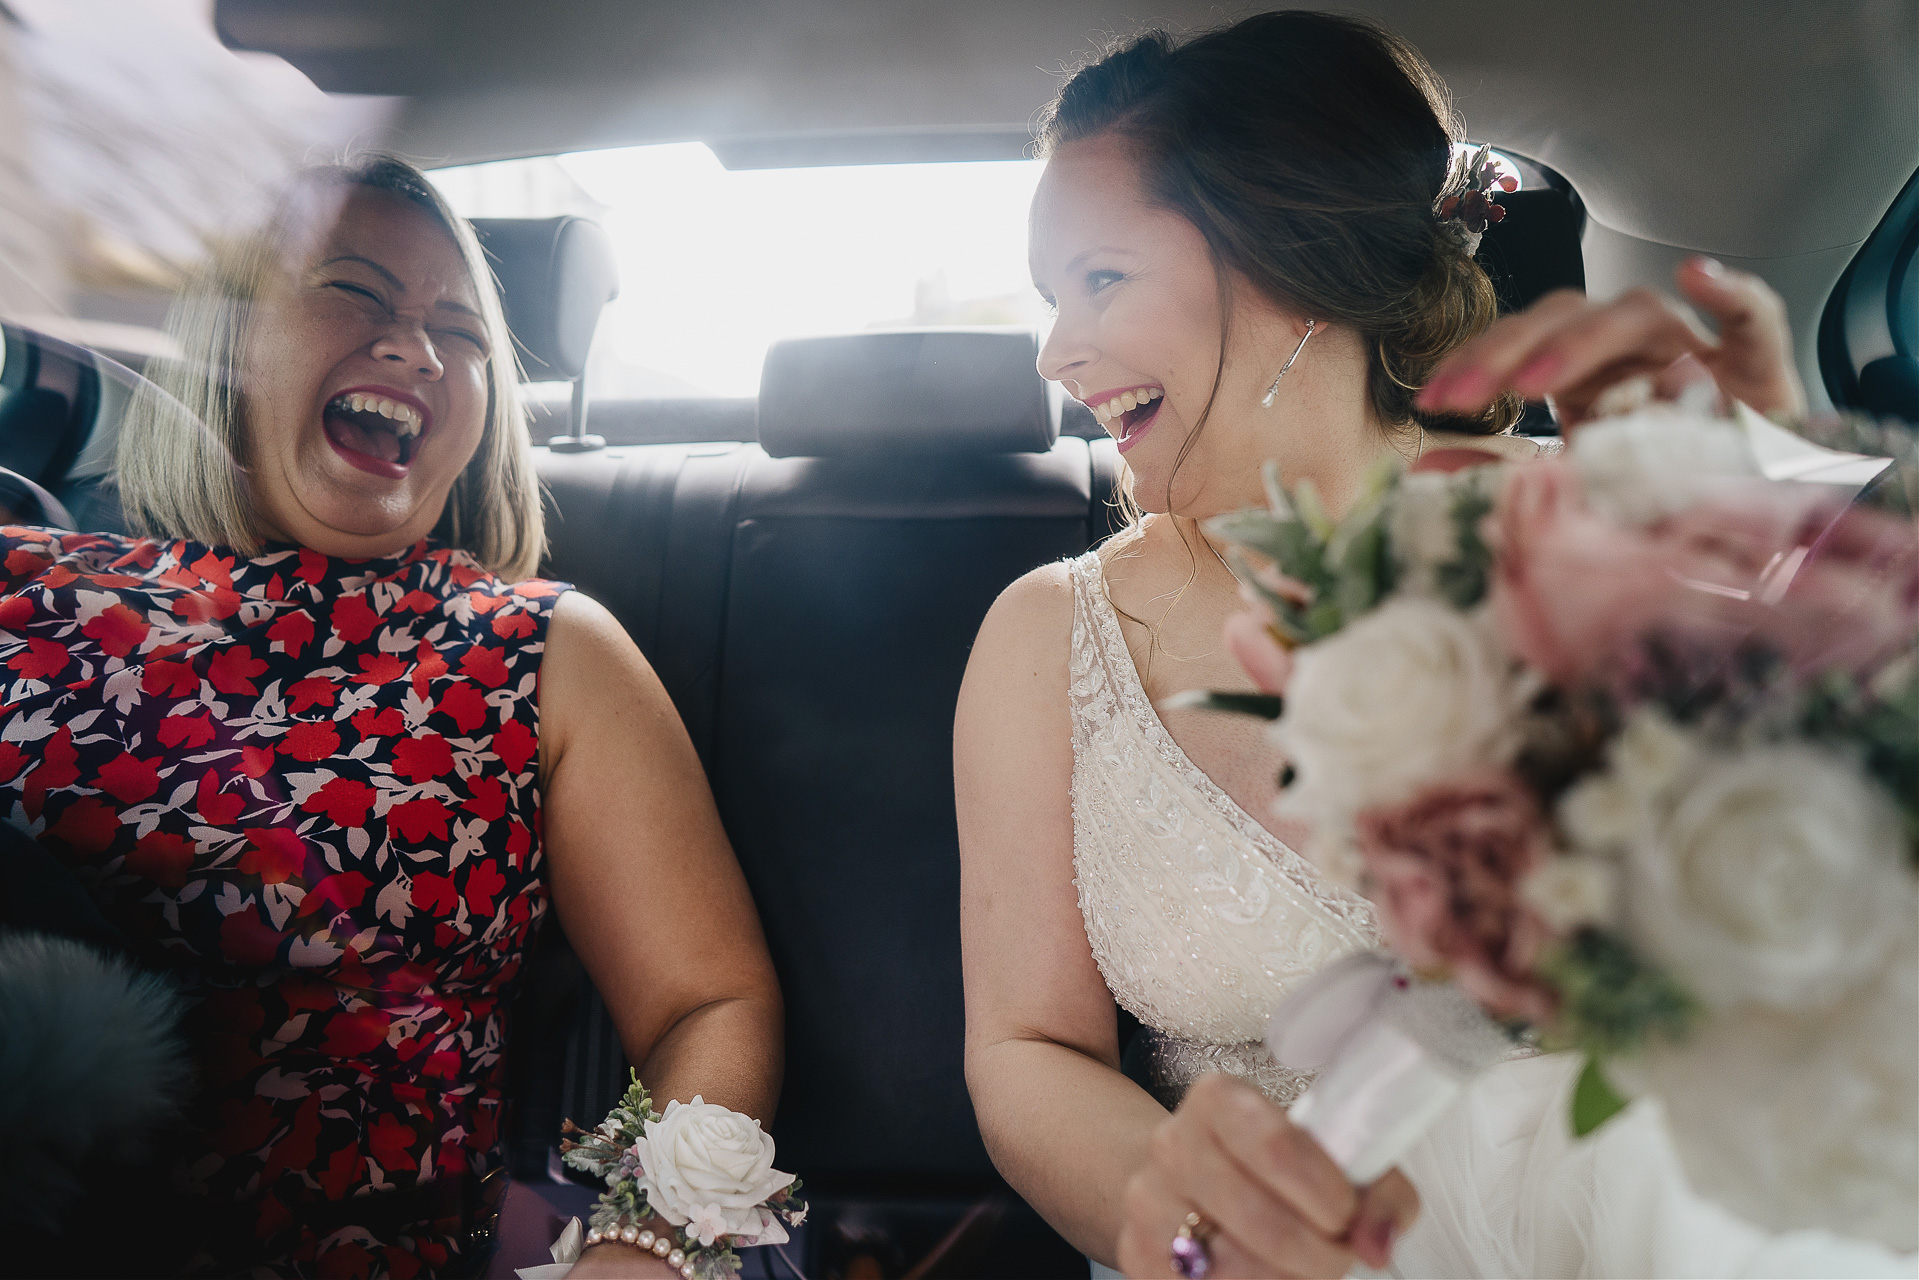 Bride and friend laughing together in taxi through plastic screen